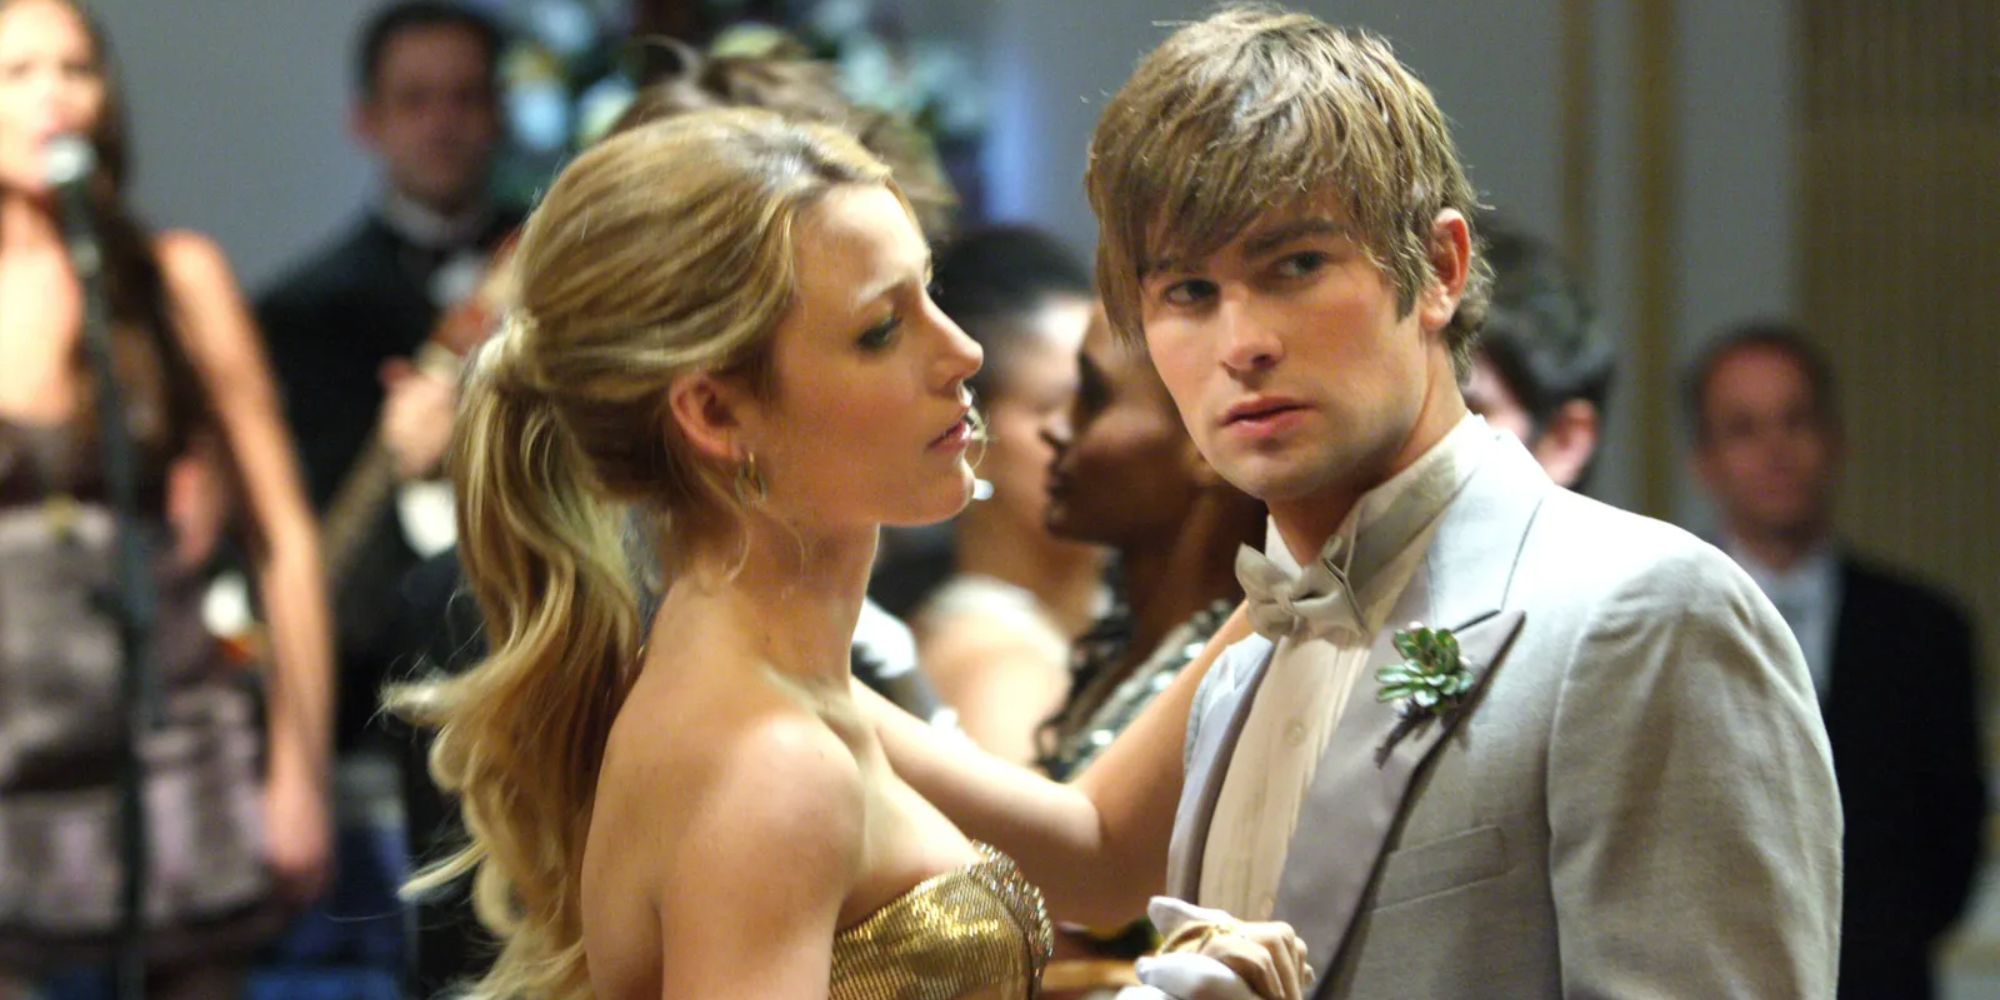 Chace Crawford as Nate Archibald 